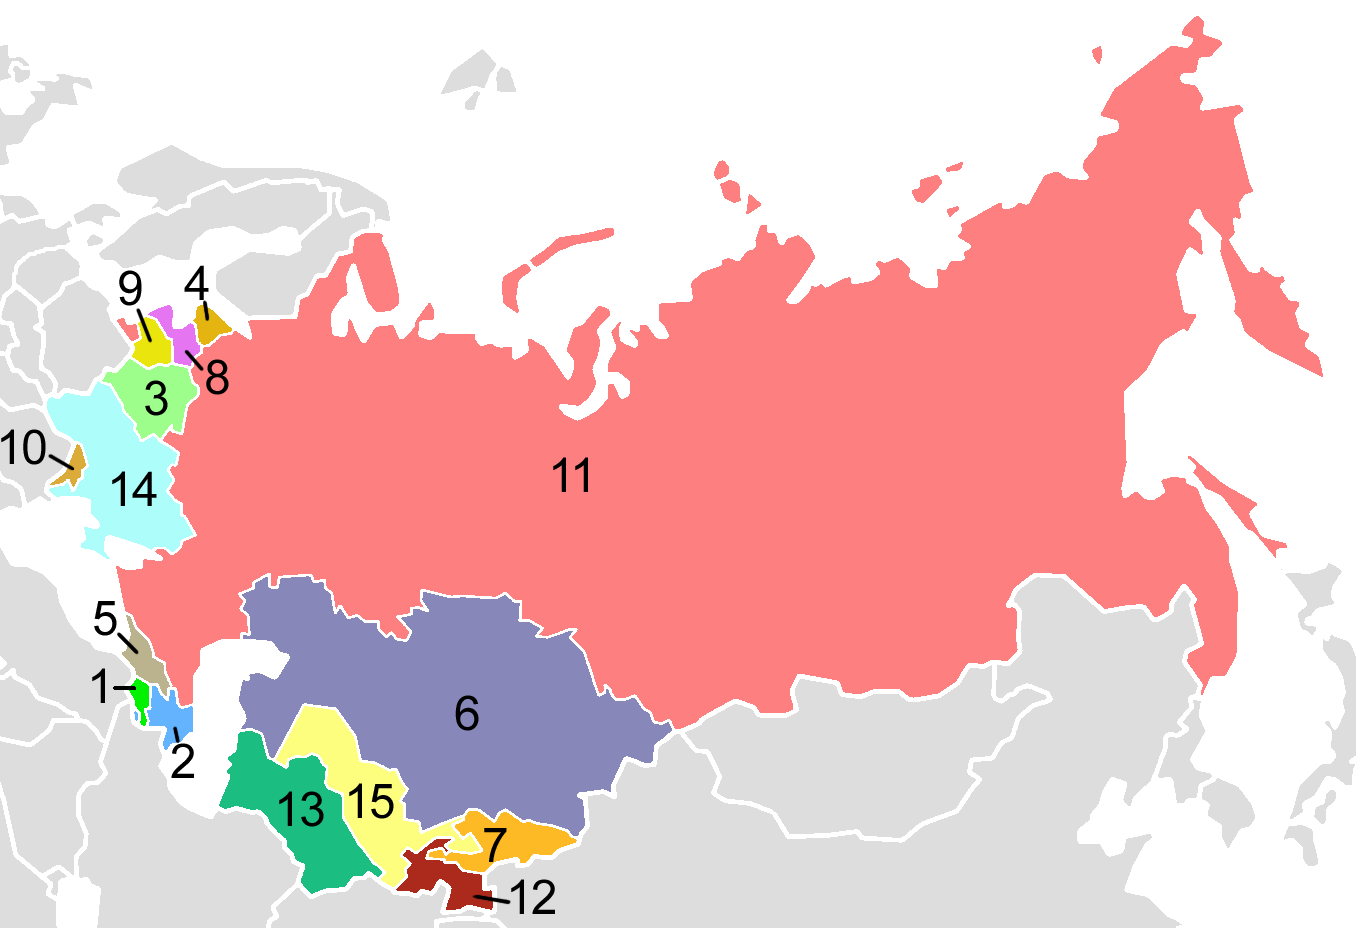 Post-Soviet states in English alphabetical order: